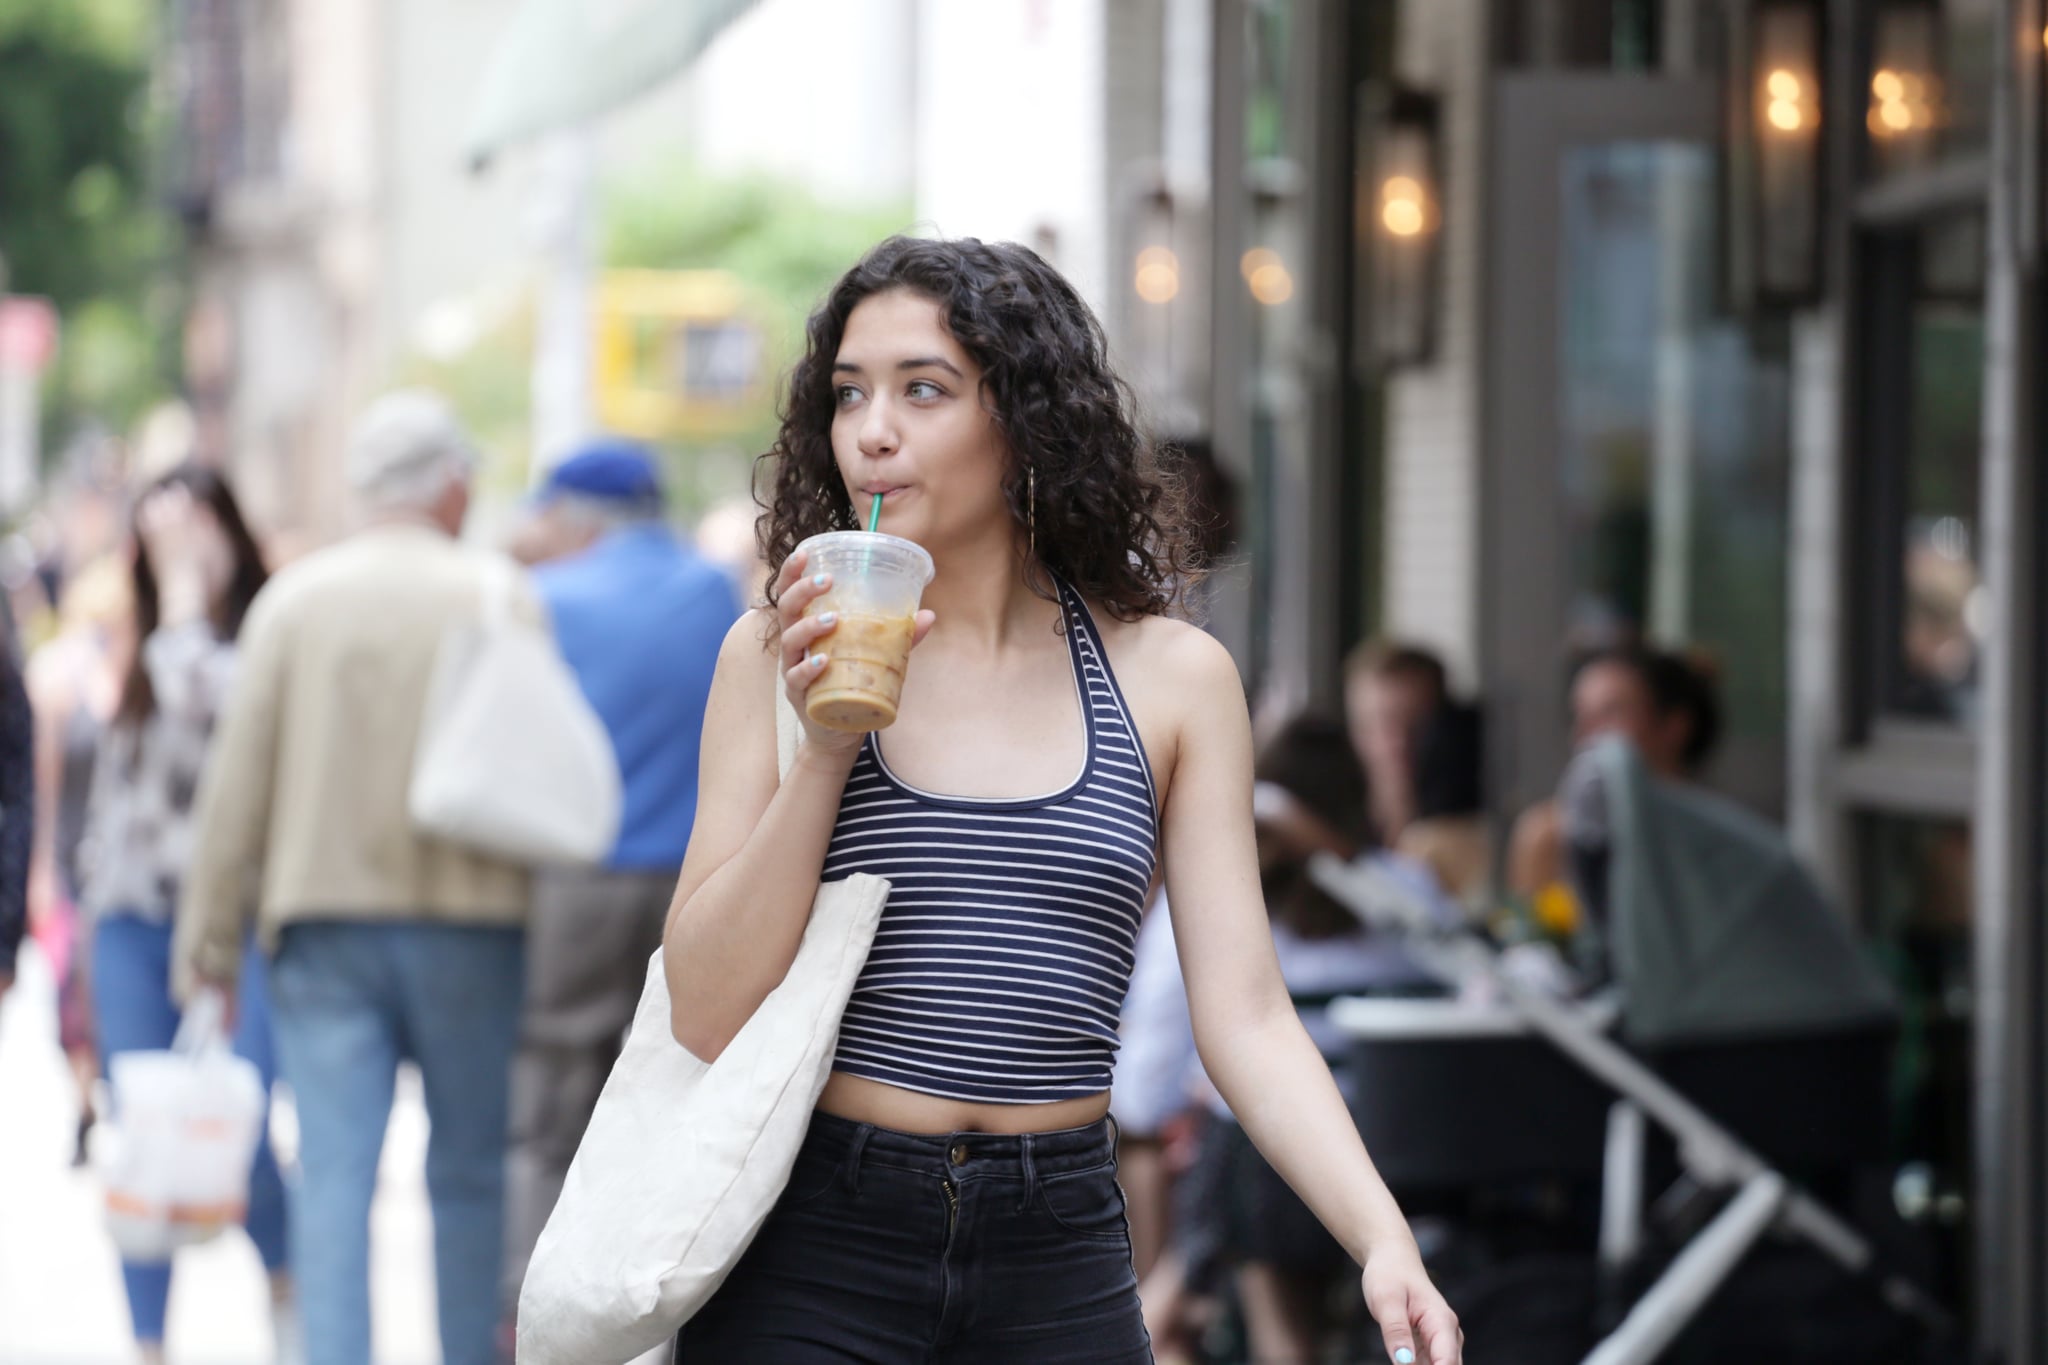 A young LatinX woman wearing a blue and white striped top, with curly hair, happily walks down a New York City street holding an iced coffee.